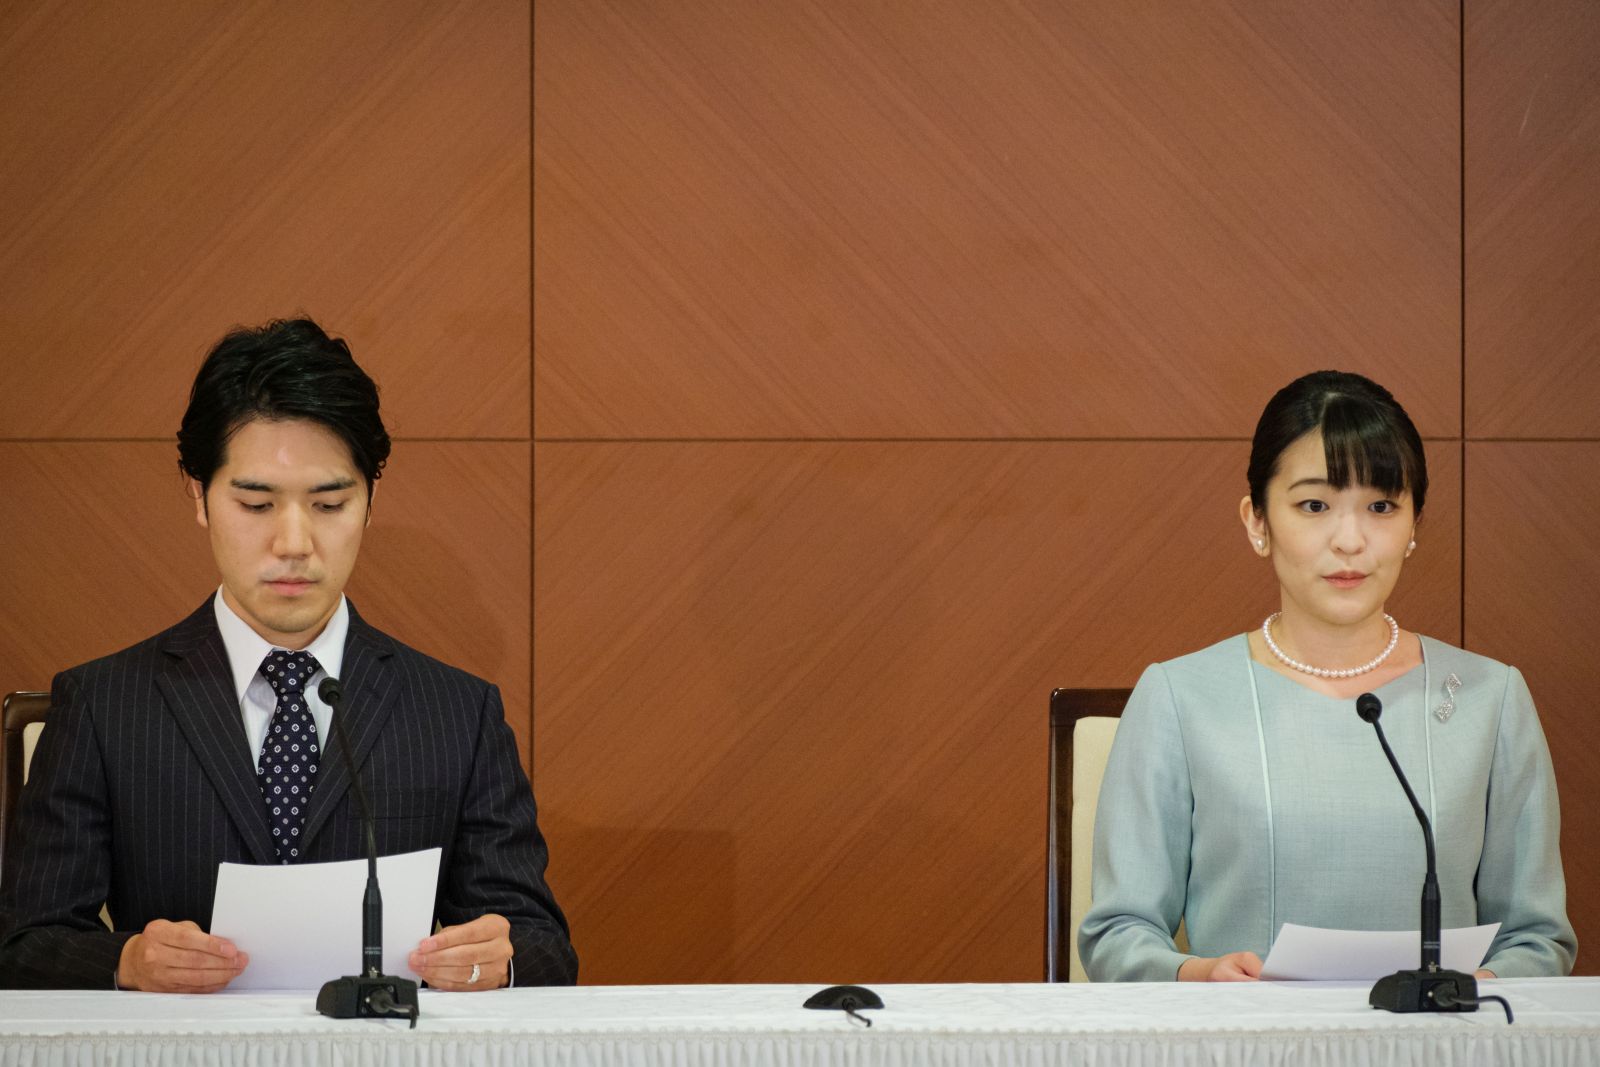 epa09546231 Princess Mako (R), the elder daughter of Prince Akishino and Princess Kiko, and her husband Kei Komuro (L), a university friend of Princess Mako, attend a press conference to announce their marriage registration at Grand Arc Hotel in Tokyo, Japan, 26 October 2021.  EPA/Nicolas Datiche / POOL